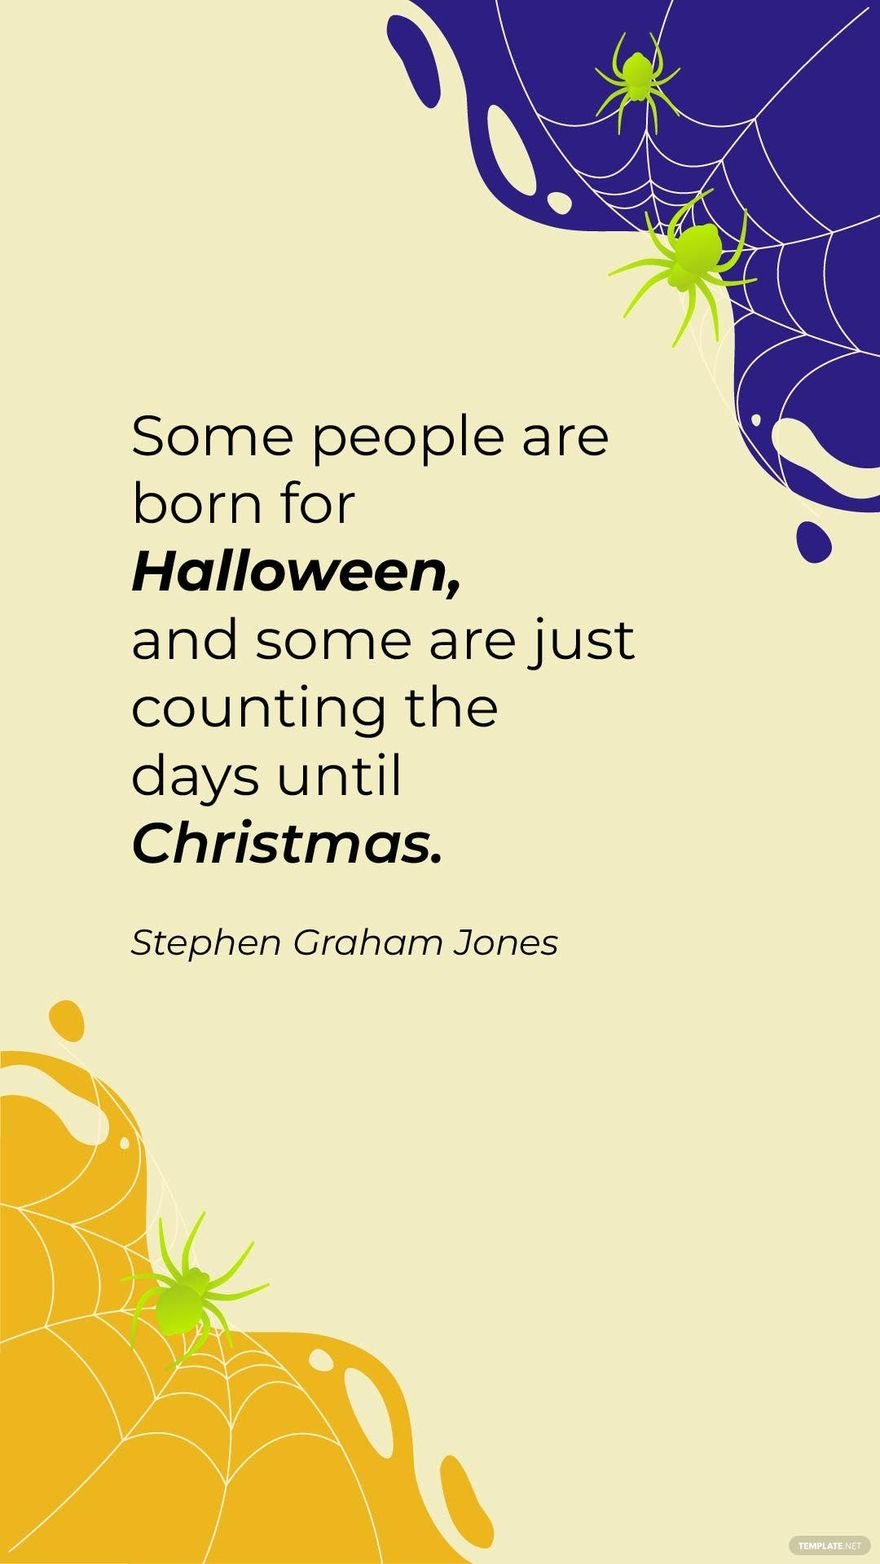  Stephen Graham Jones-Some people are born for Halloween, and some are just counting the days until Christmas. 